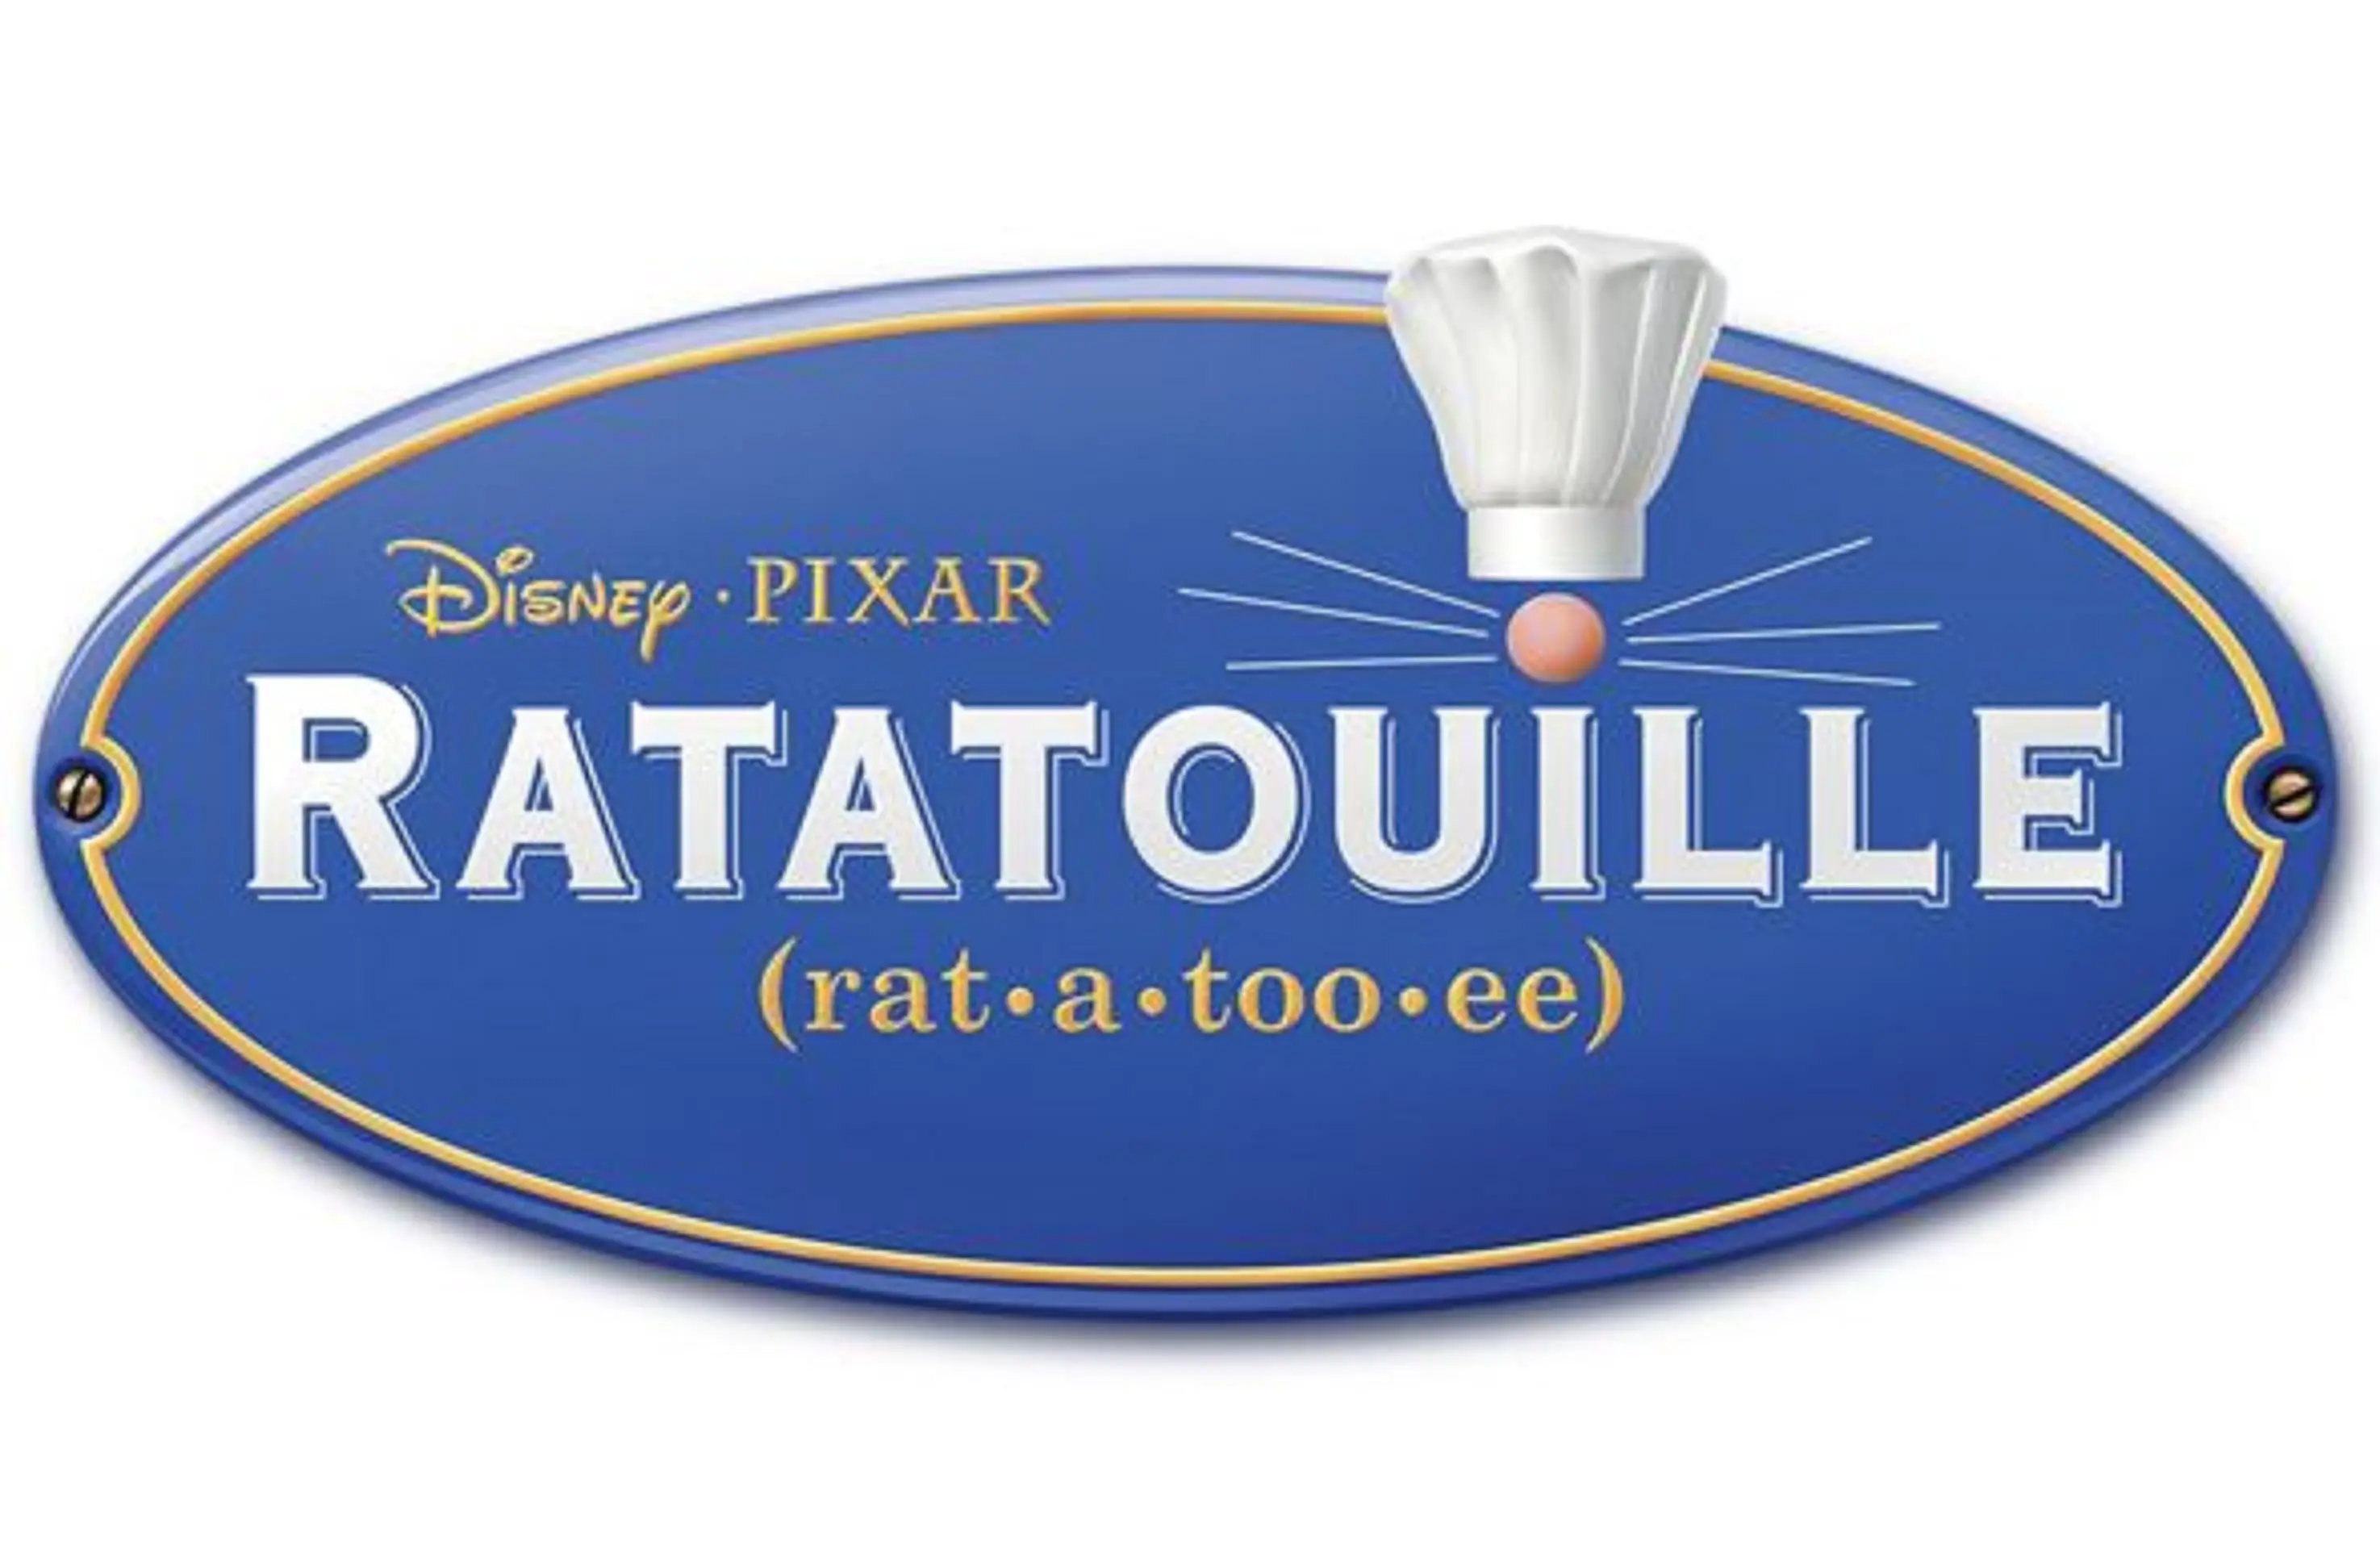 With Images 25 Ratatouille Quotes From Movie